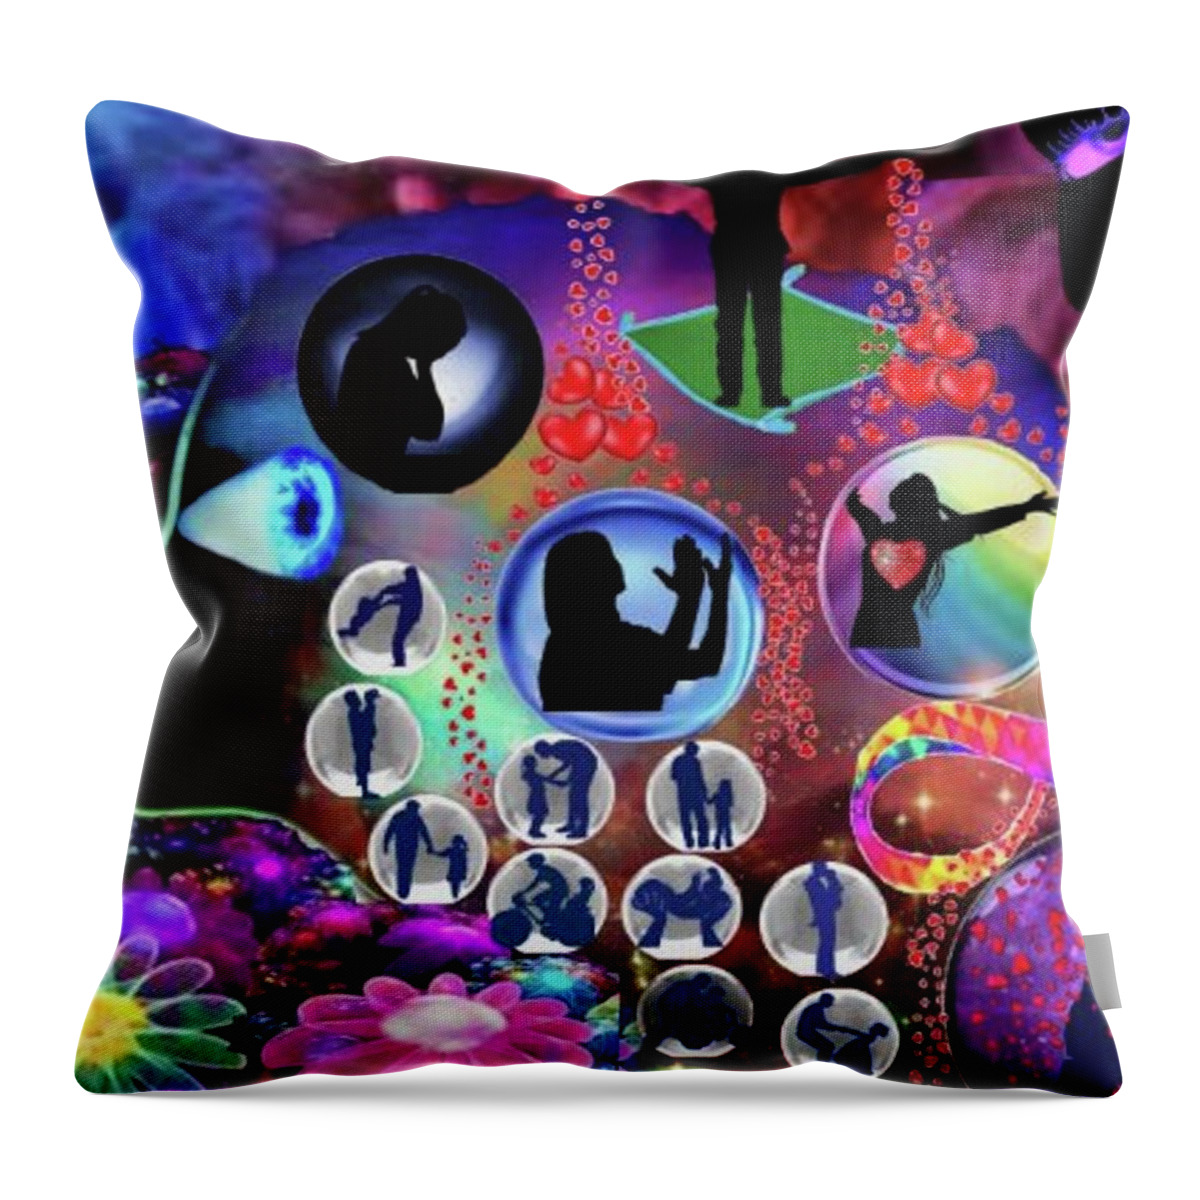 A Fathers Love Poem Throw Pillow featuring the digital art A Fathers Love, A Daughters Minds Eye by Stephen Battel